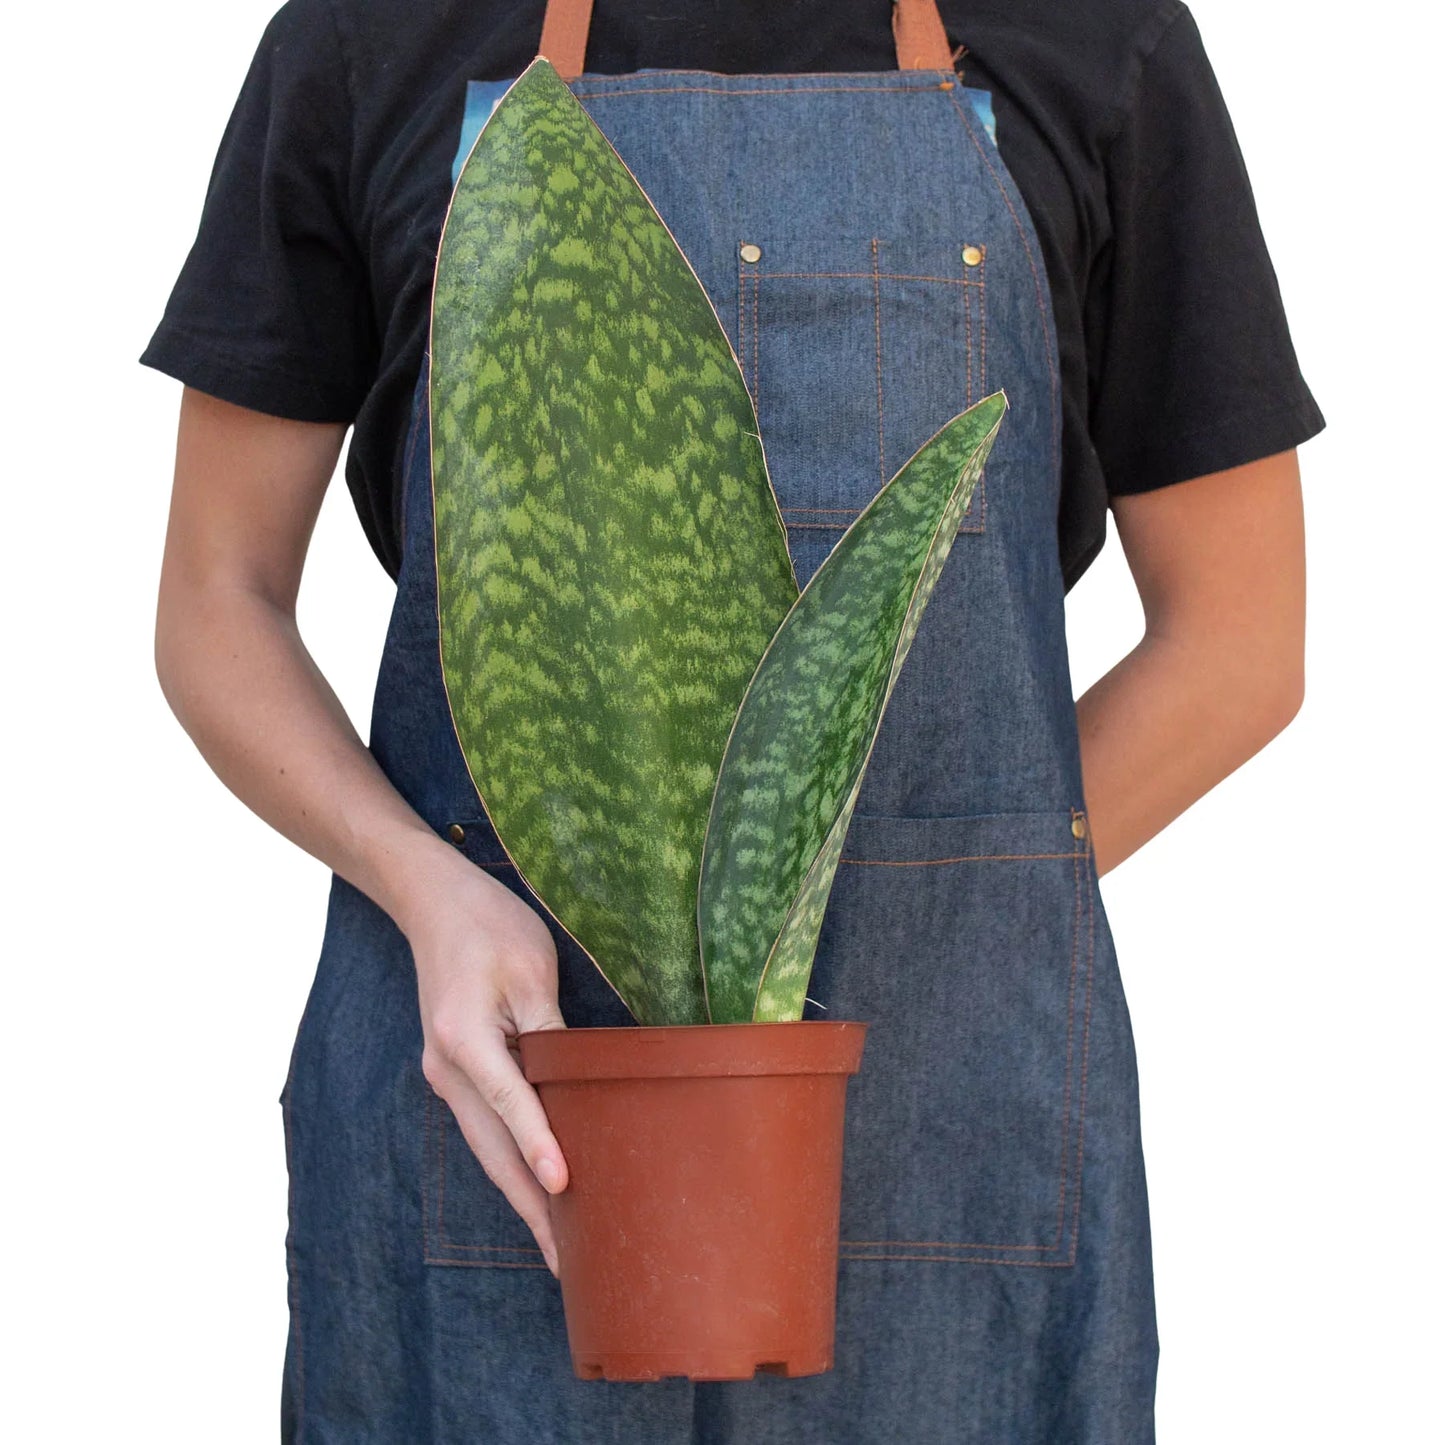 Whale of a Time: Shark Fin Snake Plant - Unique, Easy Care Indoor Plant with Enormous Paddle-Like Leaves